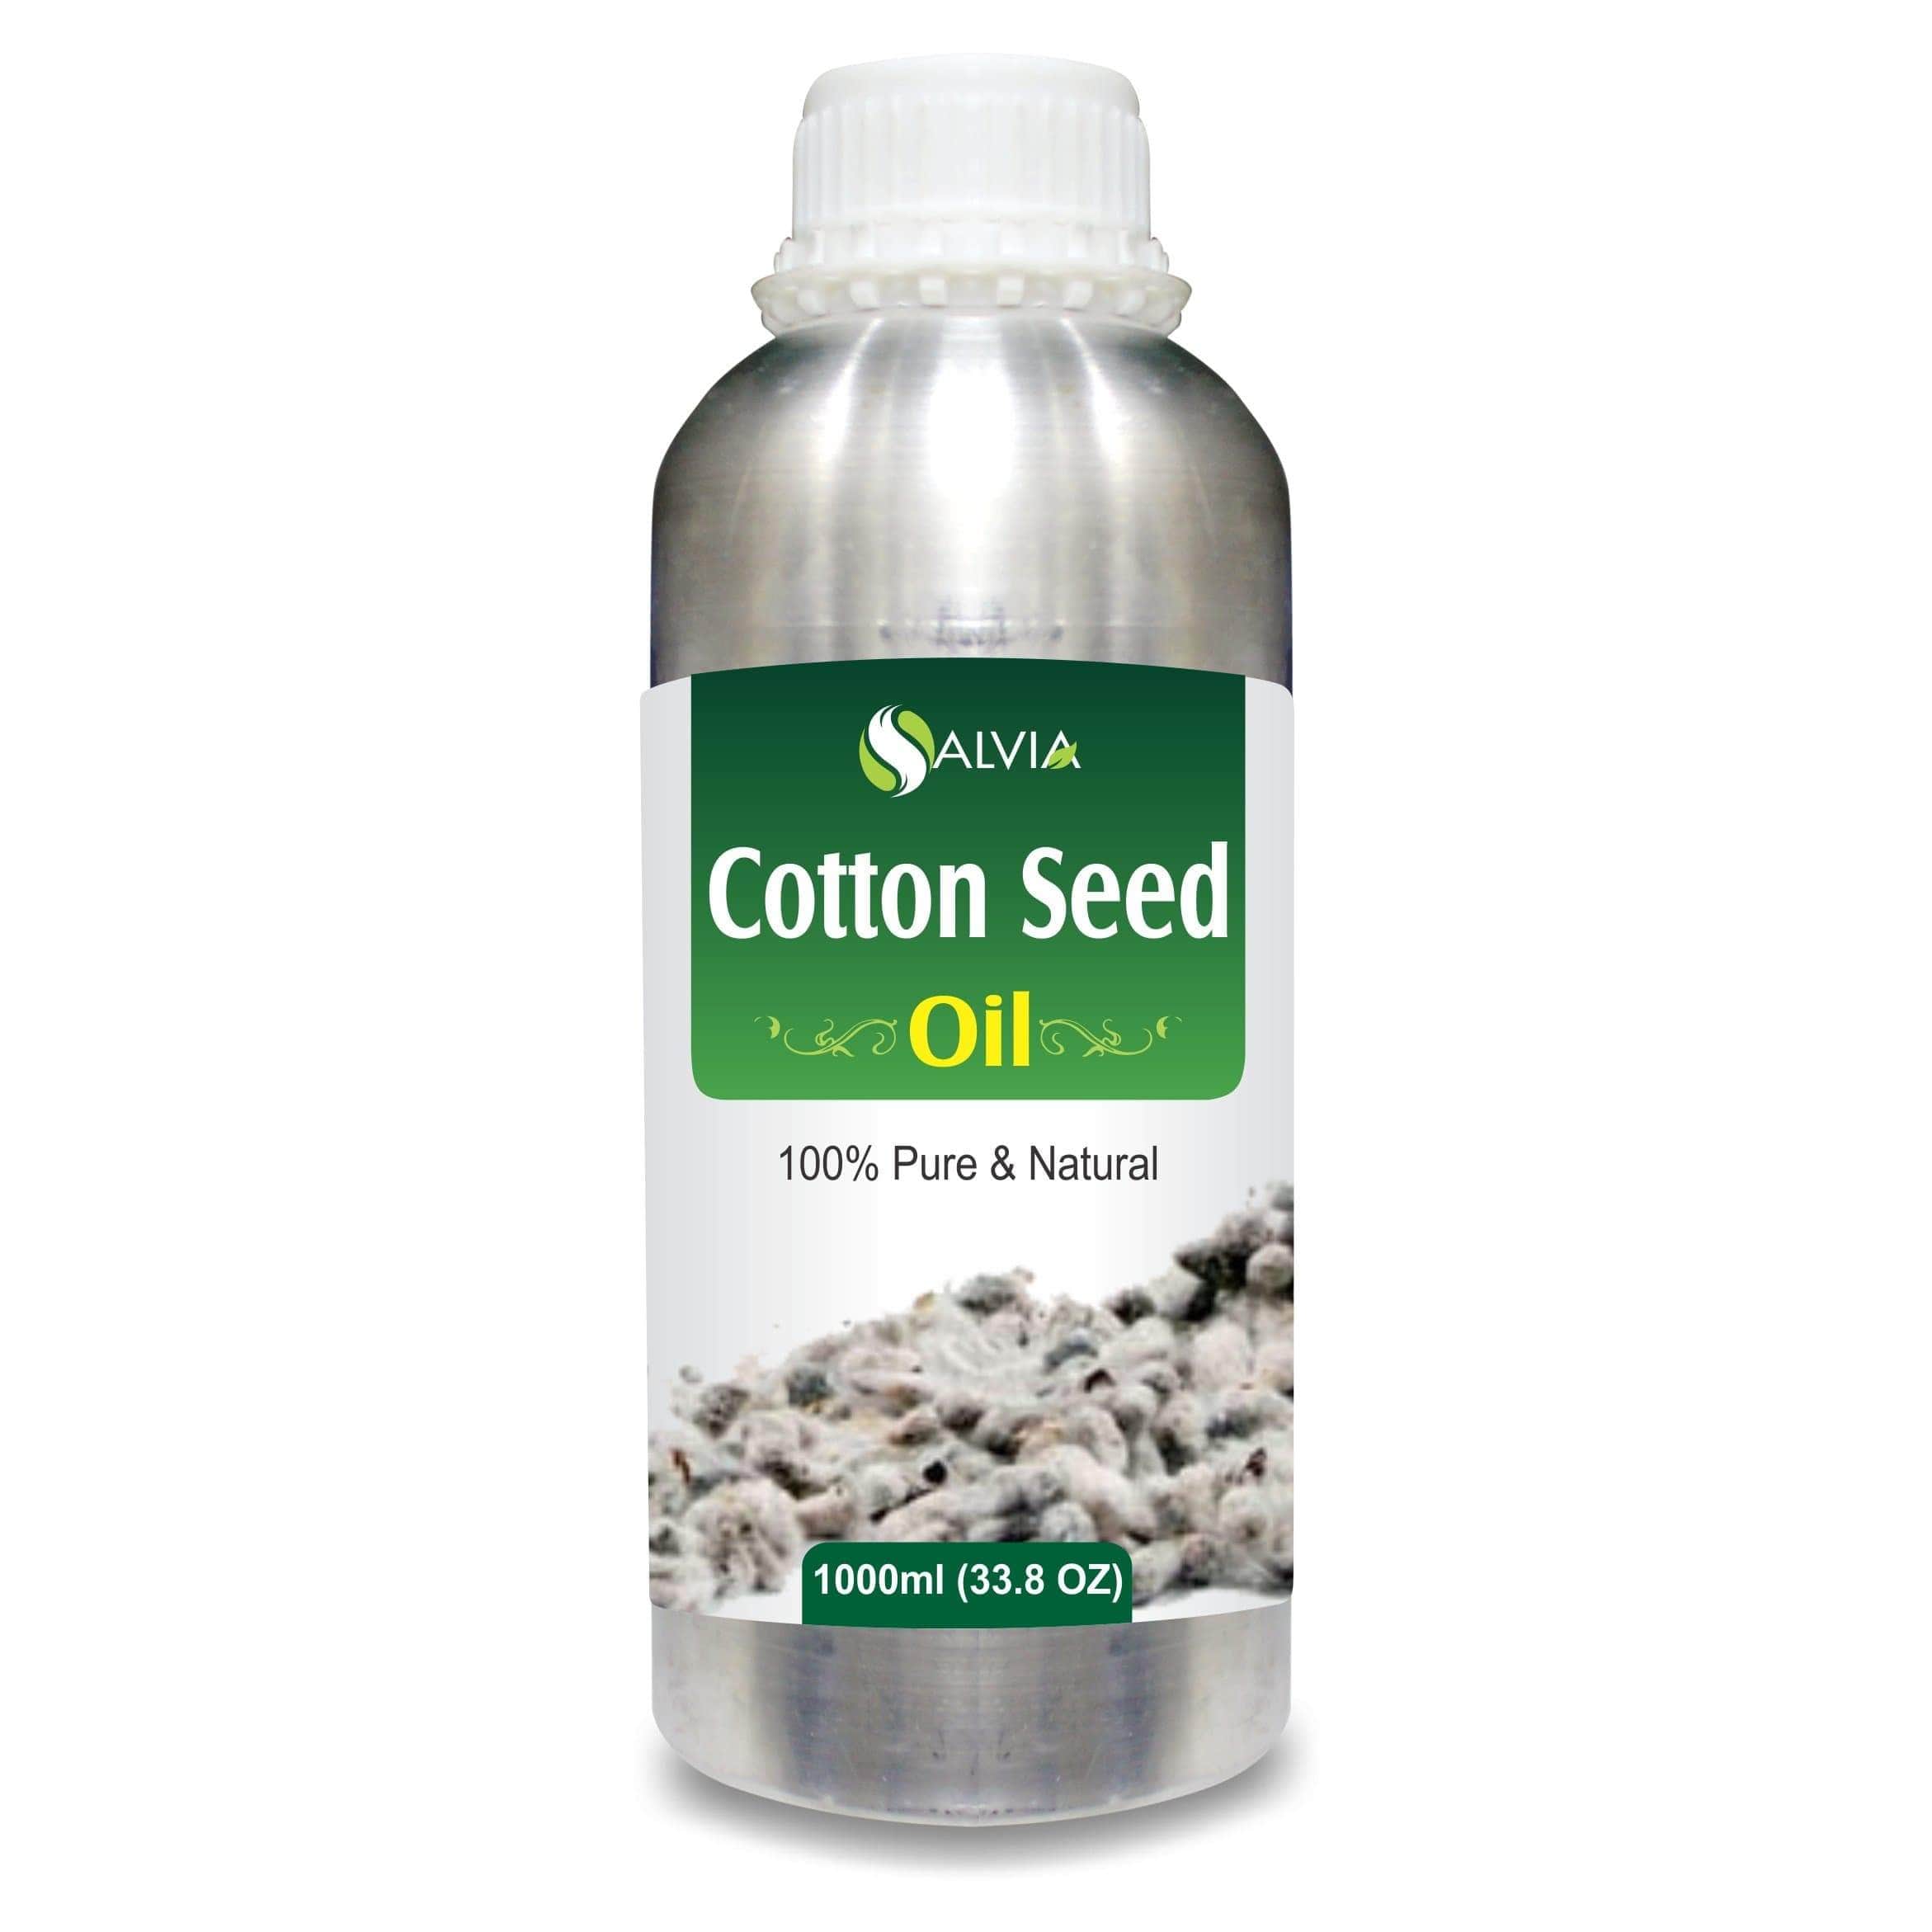 cotton seed oil good or bad